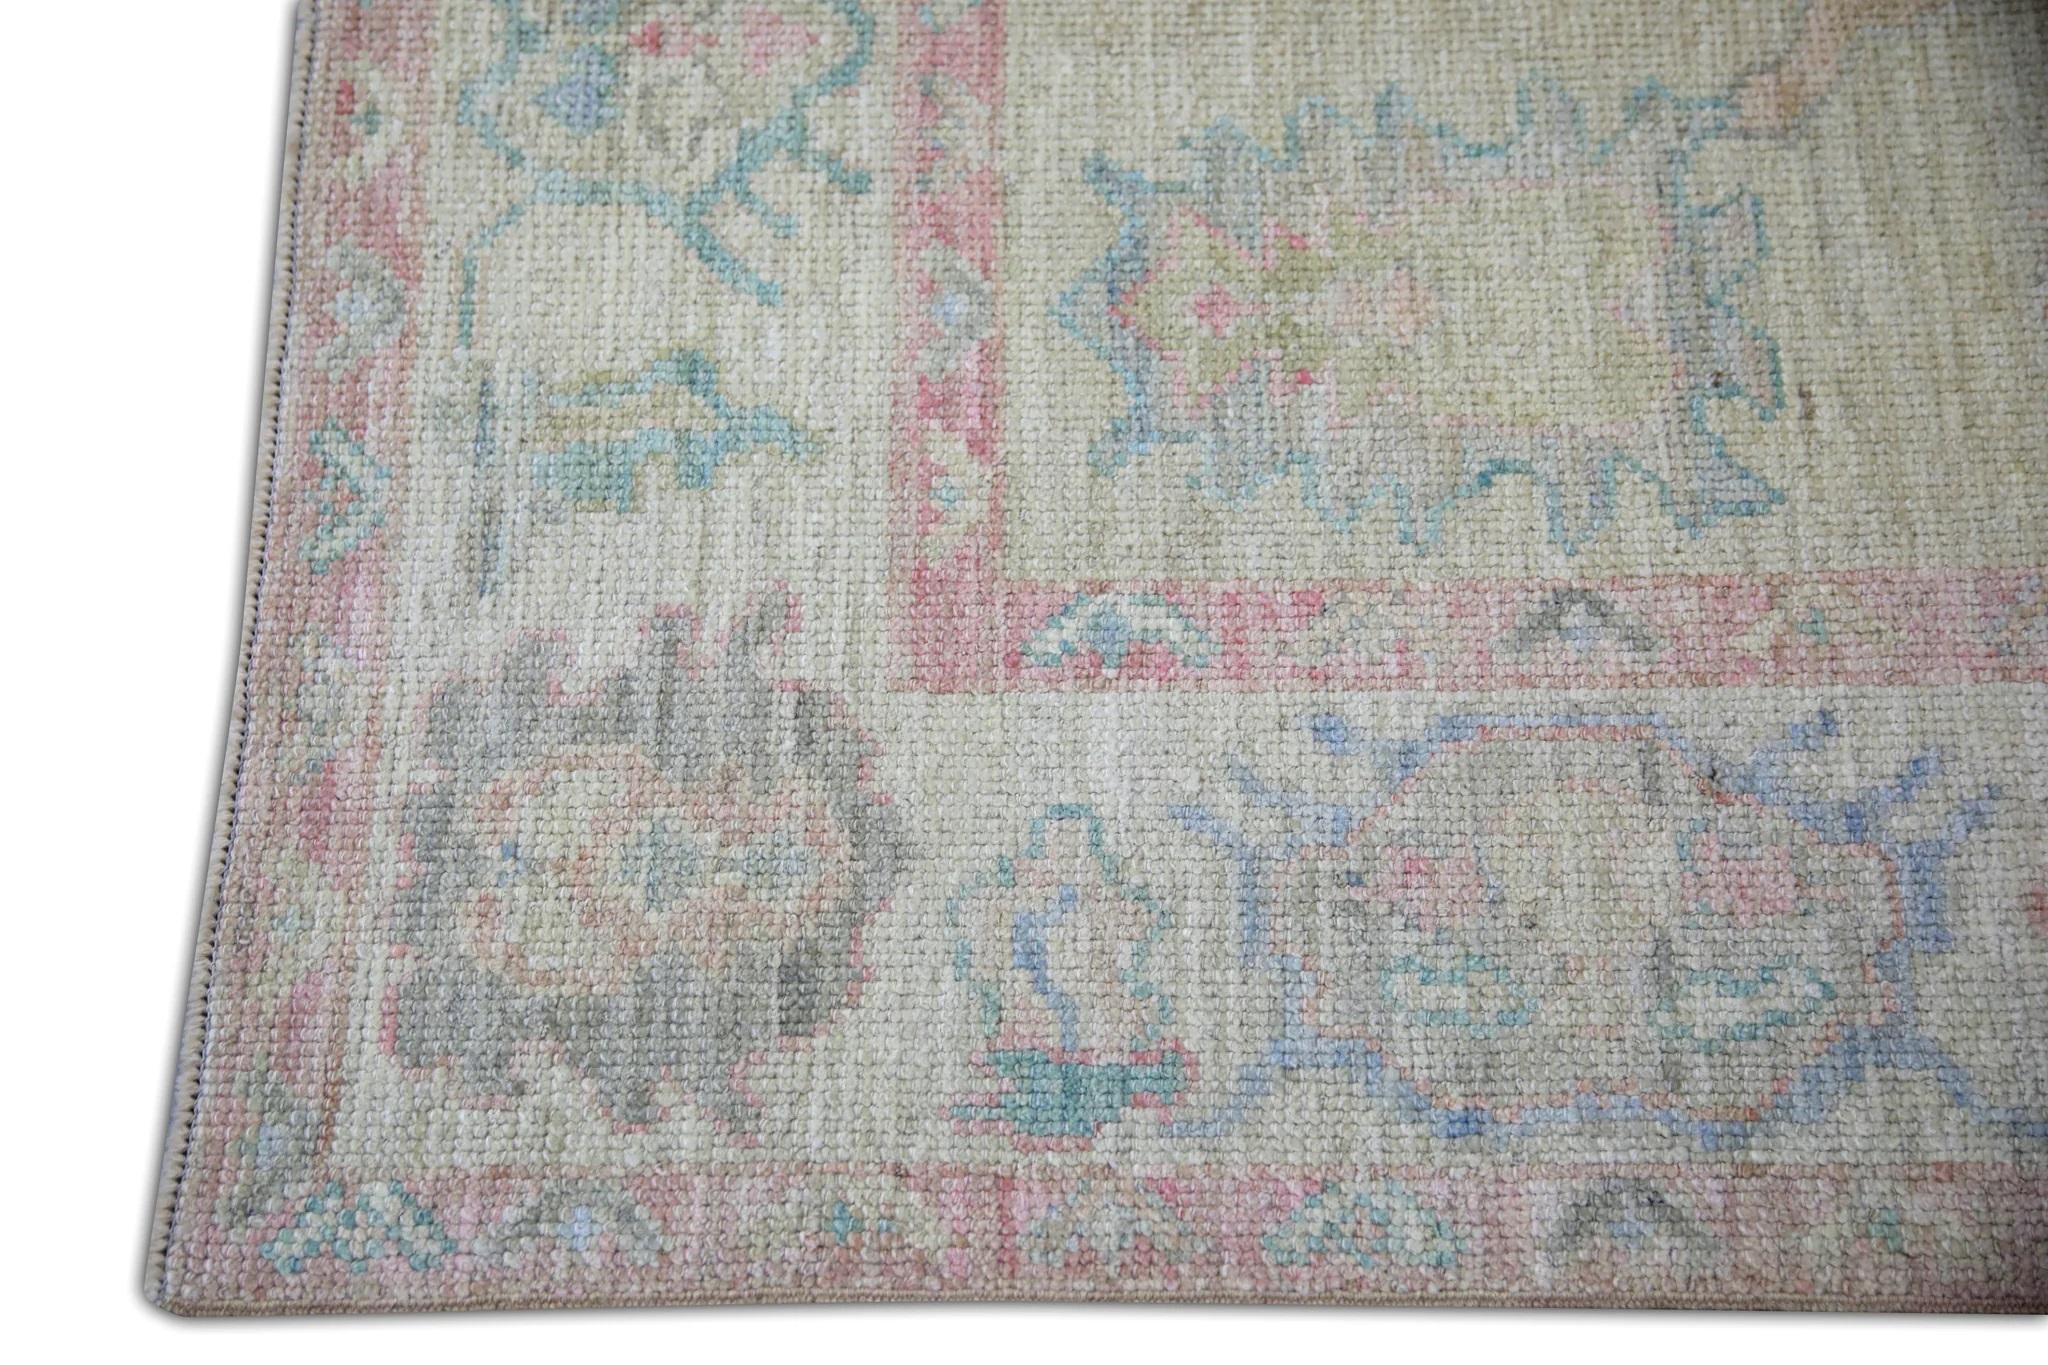 Vegetable Dyed Multicolor Floral Handwoven Wool Turkish Oushak Rug 5' x 6'9